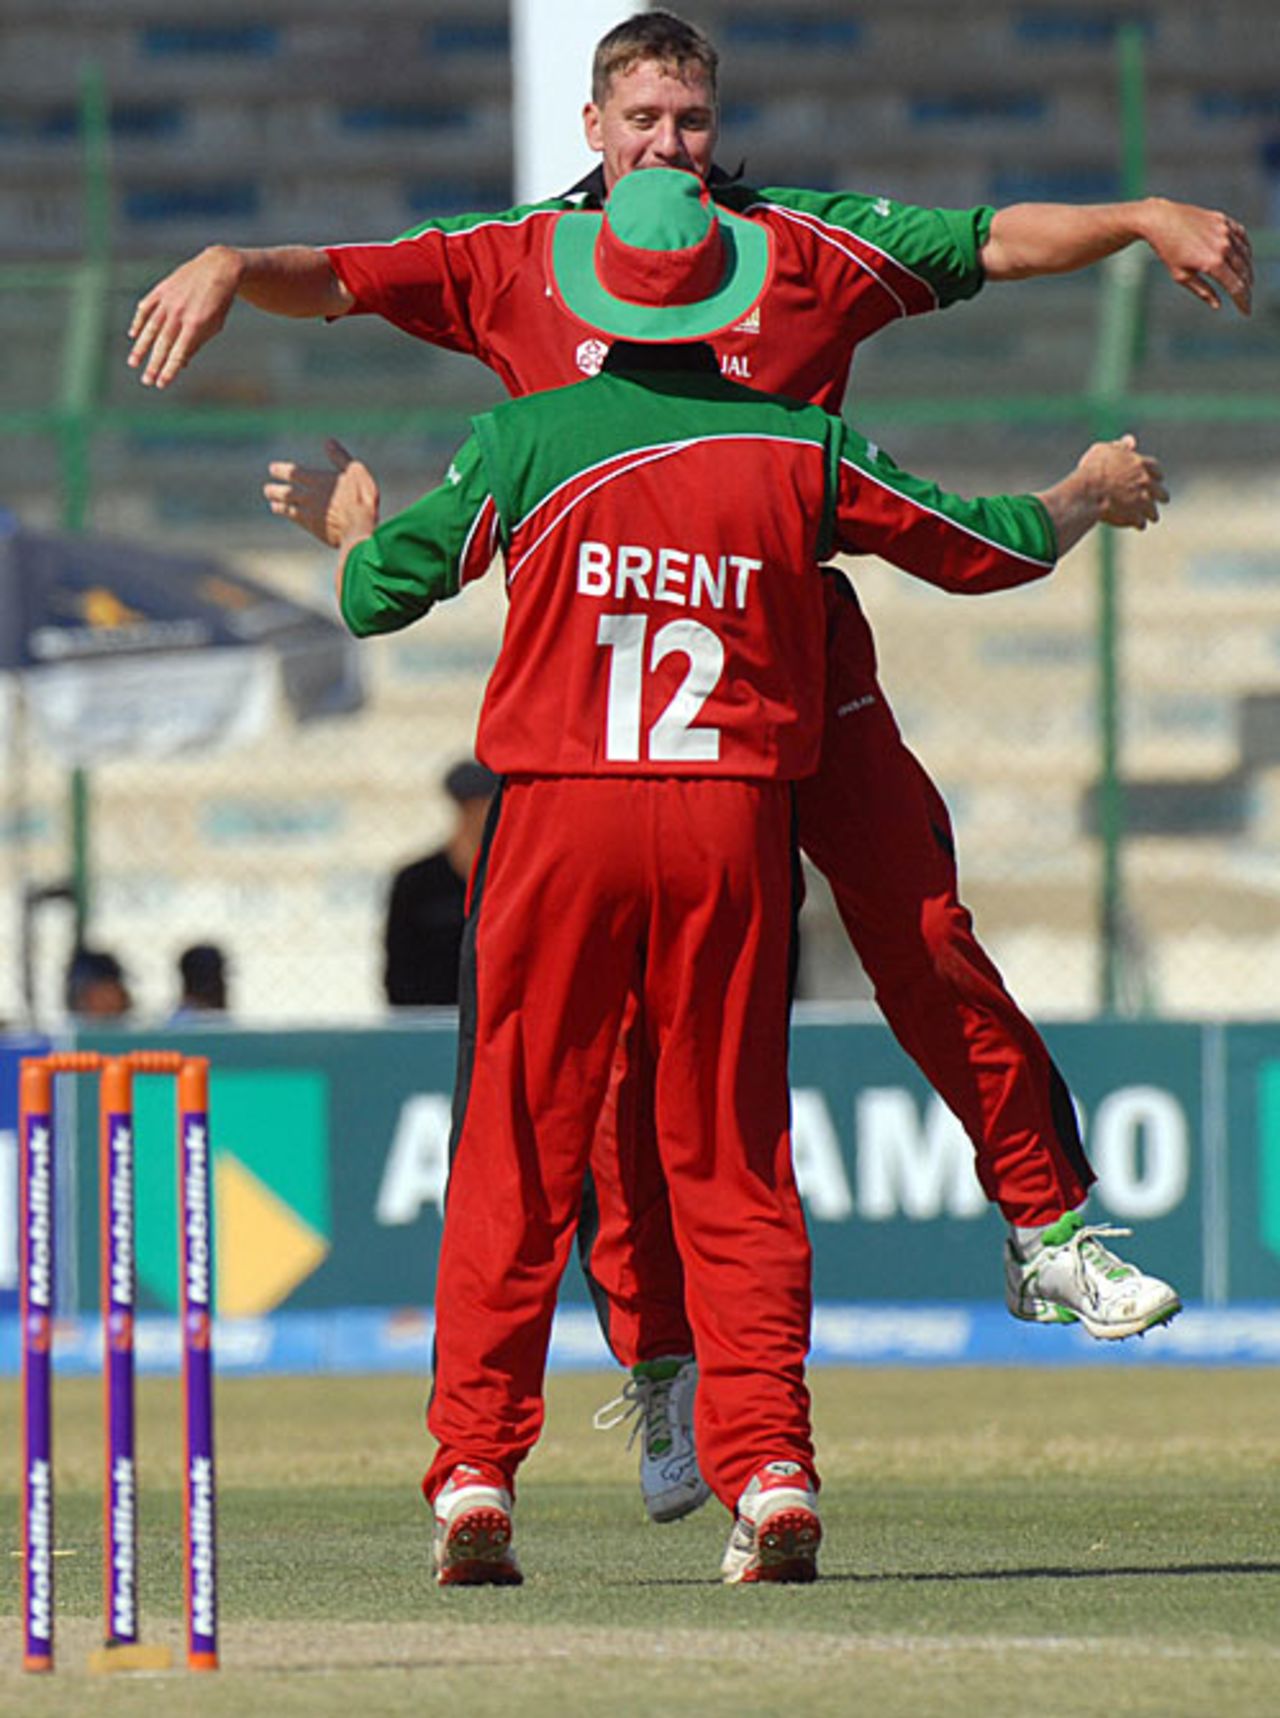 Ray Price is delighted with the wicket of Younis Khan, Pakistan v Zimbabwe, 1st ODI, Karachi, January 21, 2008